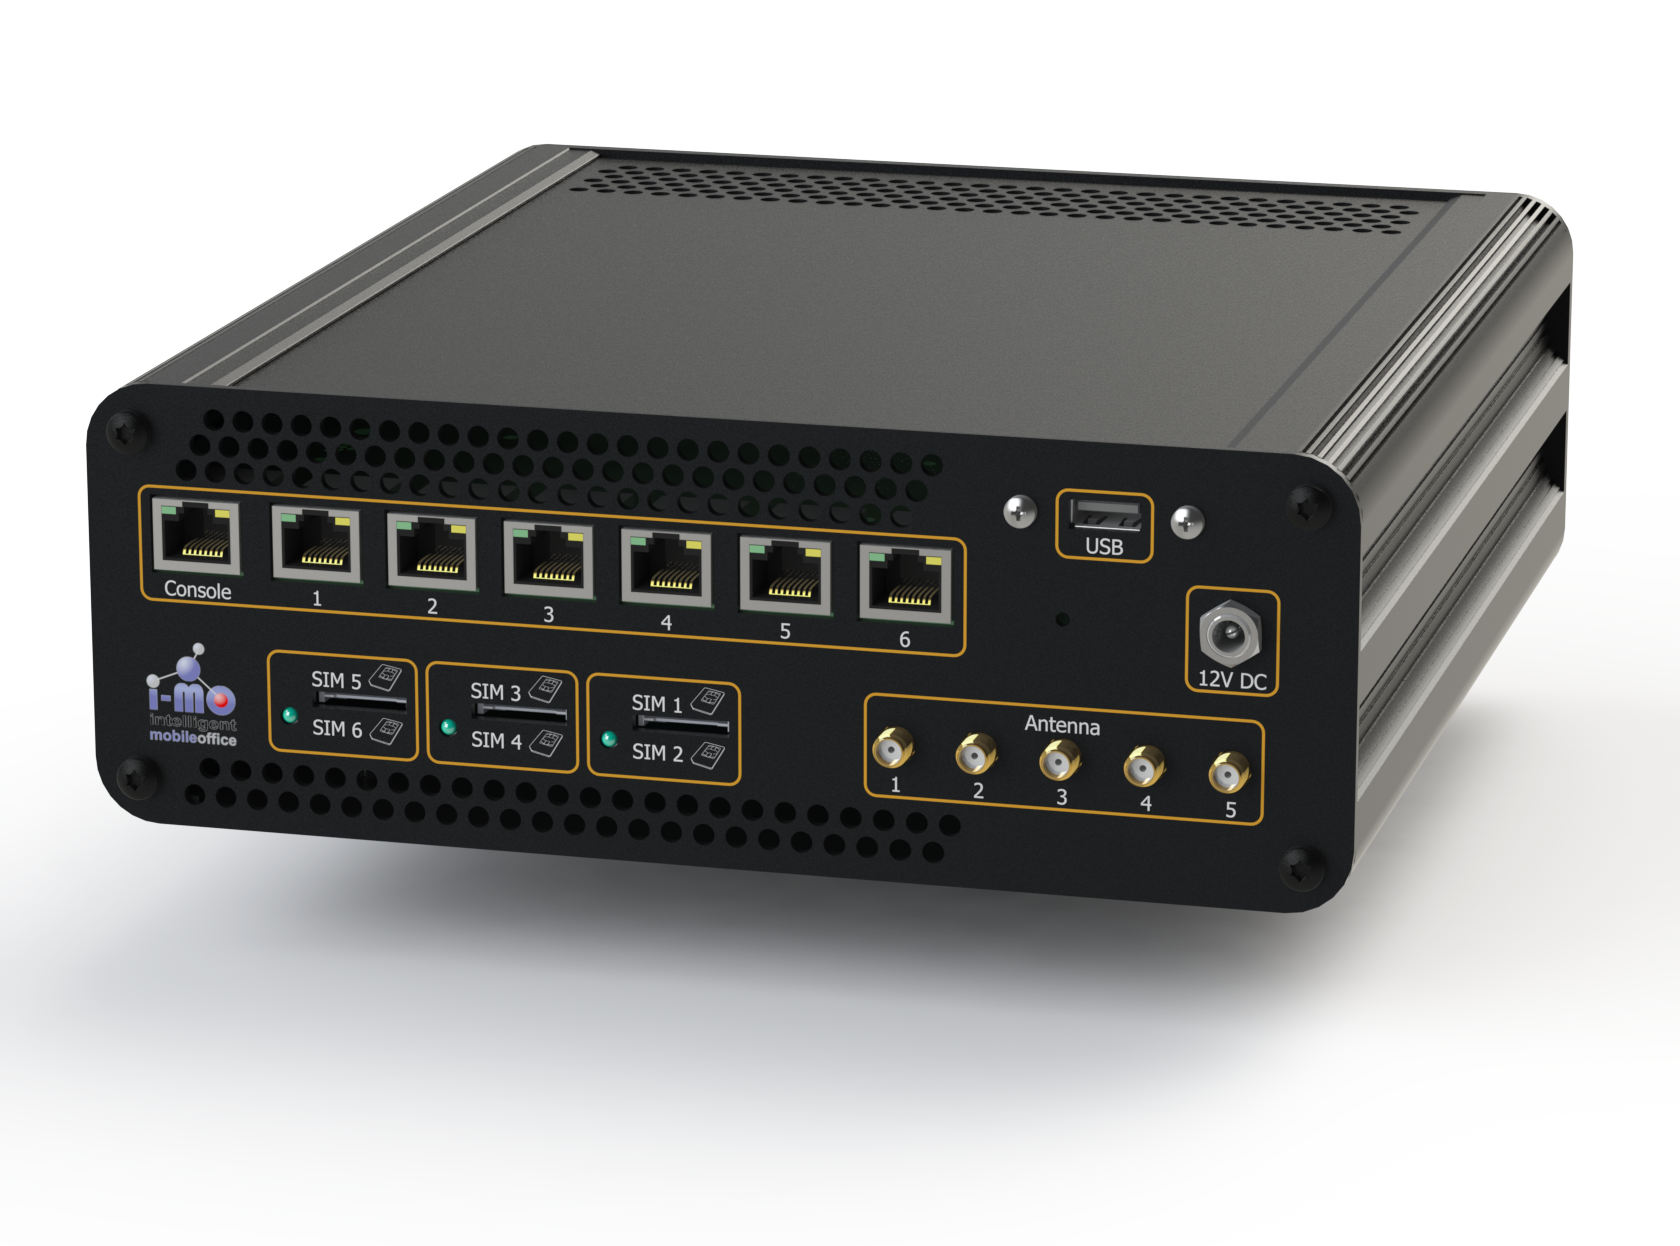 The i-MO multichannel router appliance